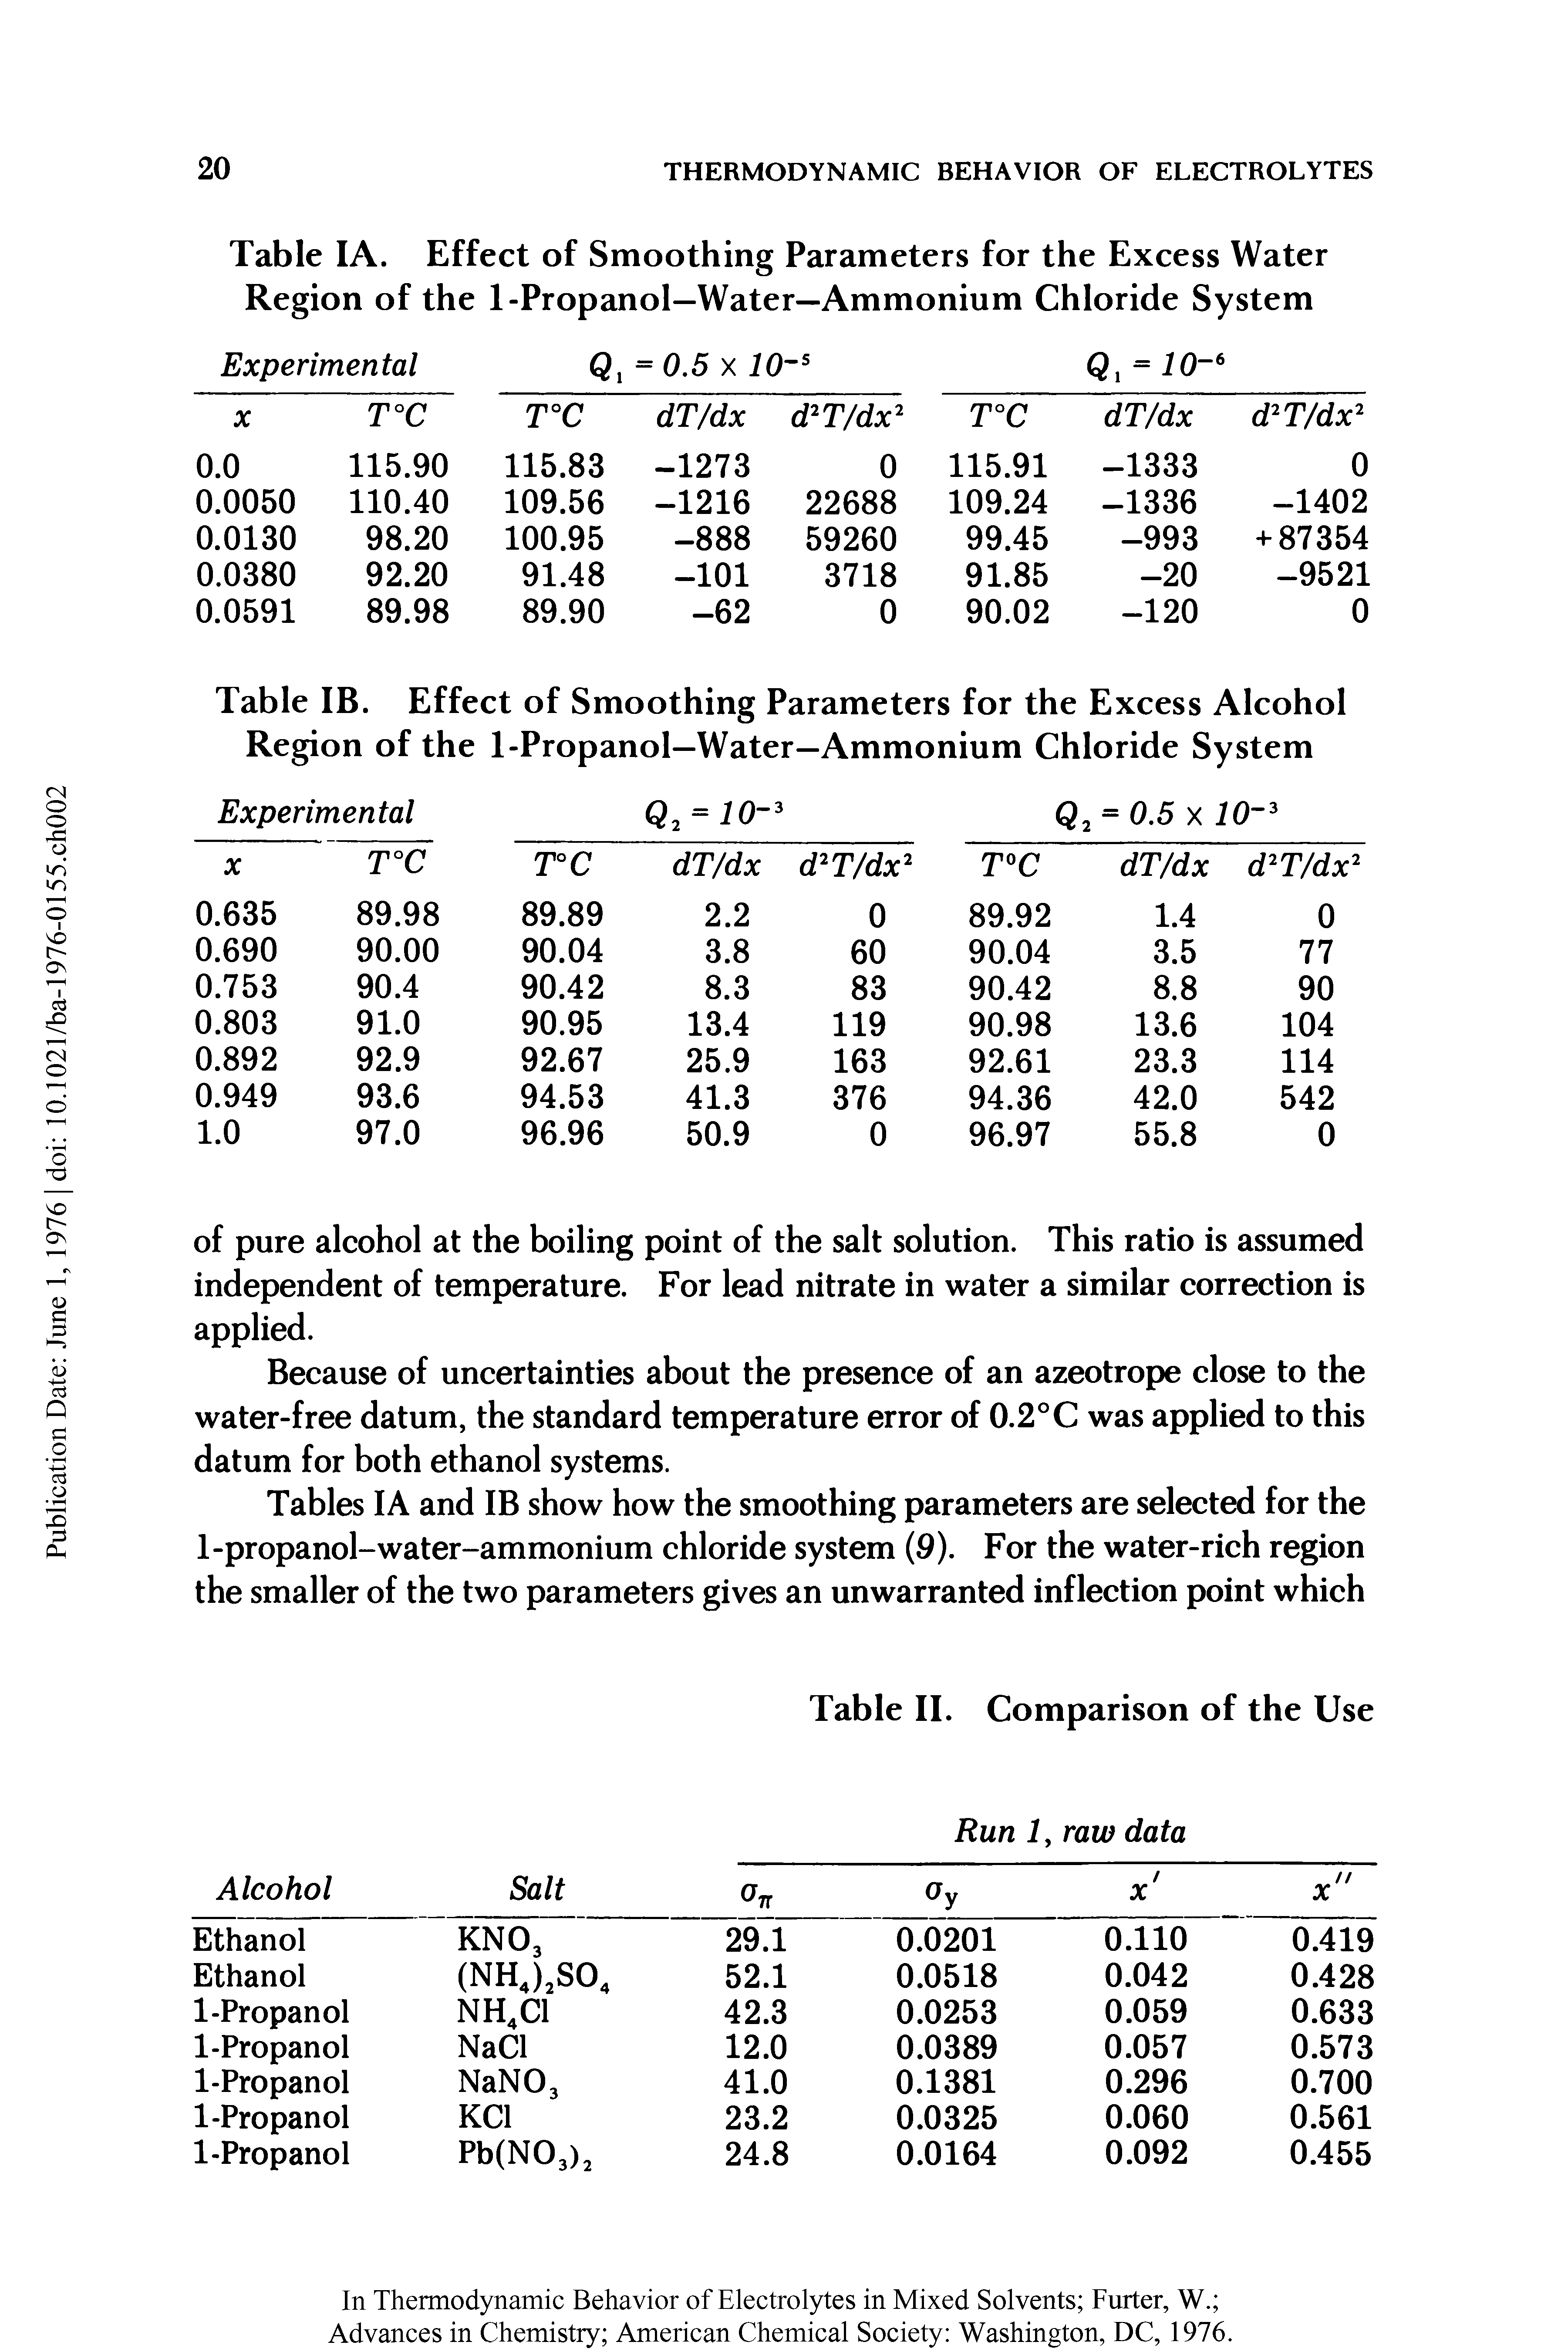 Table IA. Effect of Smoothing Parameters for the Excess Water Region of the 1-Propanol—Water—Ammonium Chloride System...